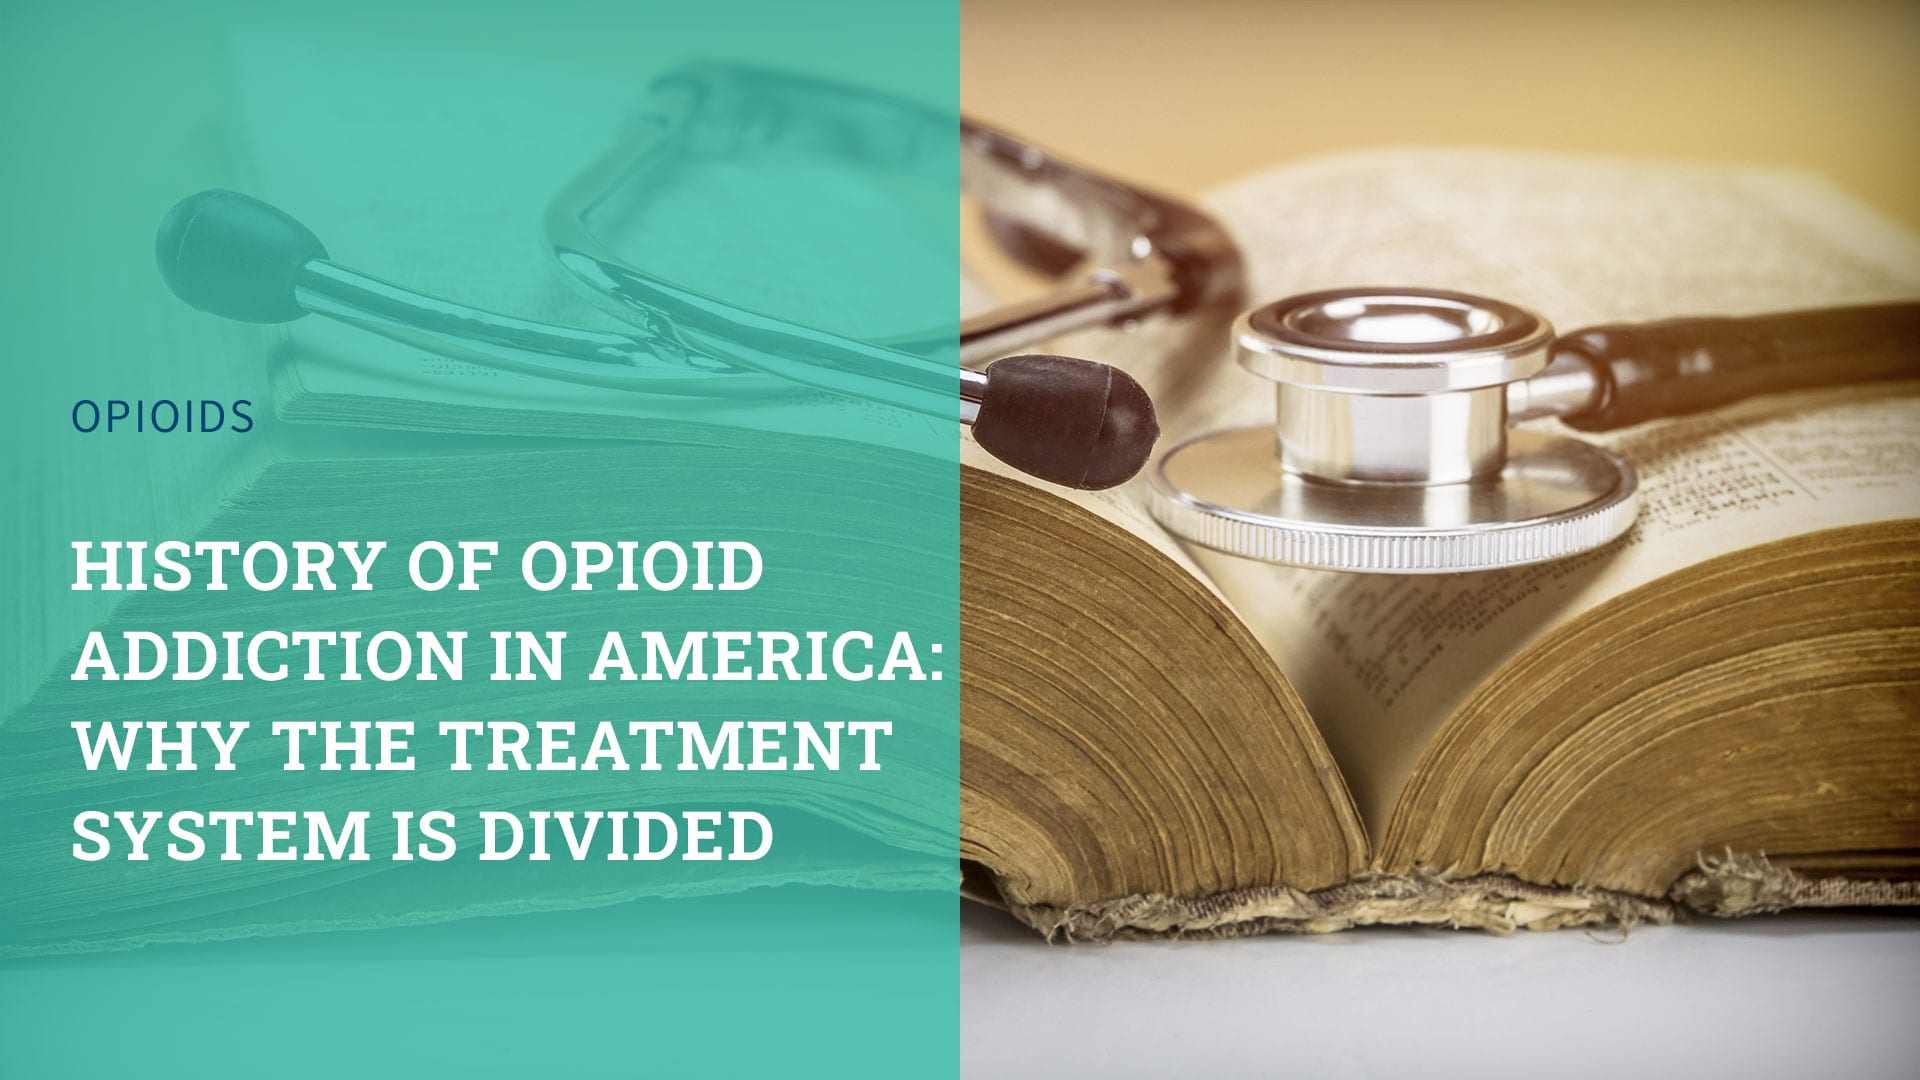 History of Opioid Addiction in America: Why the Treatment System is Divided